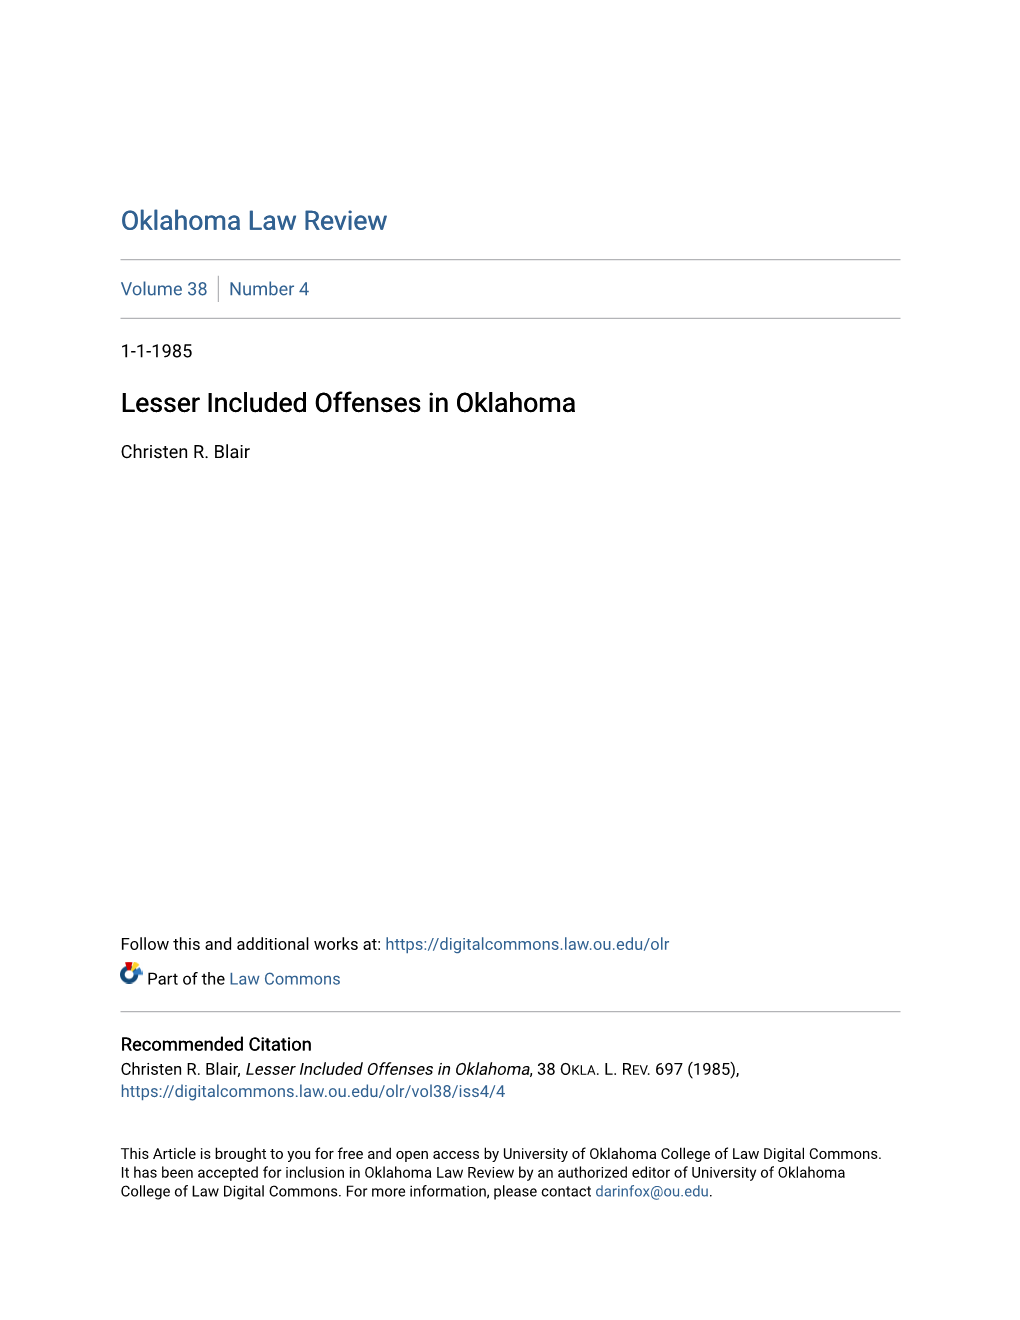 Lesser Included Offenses in Oklahoma